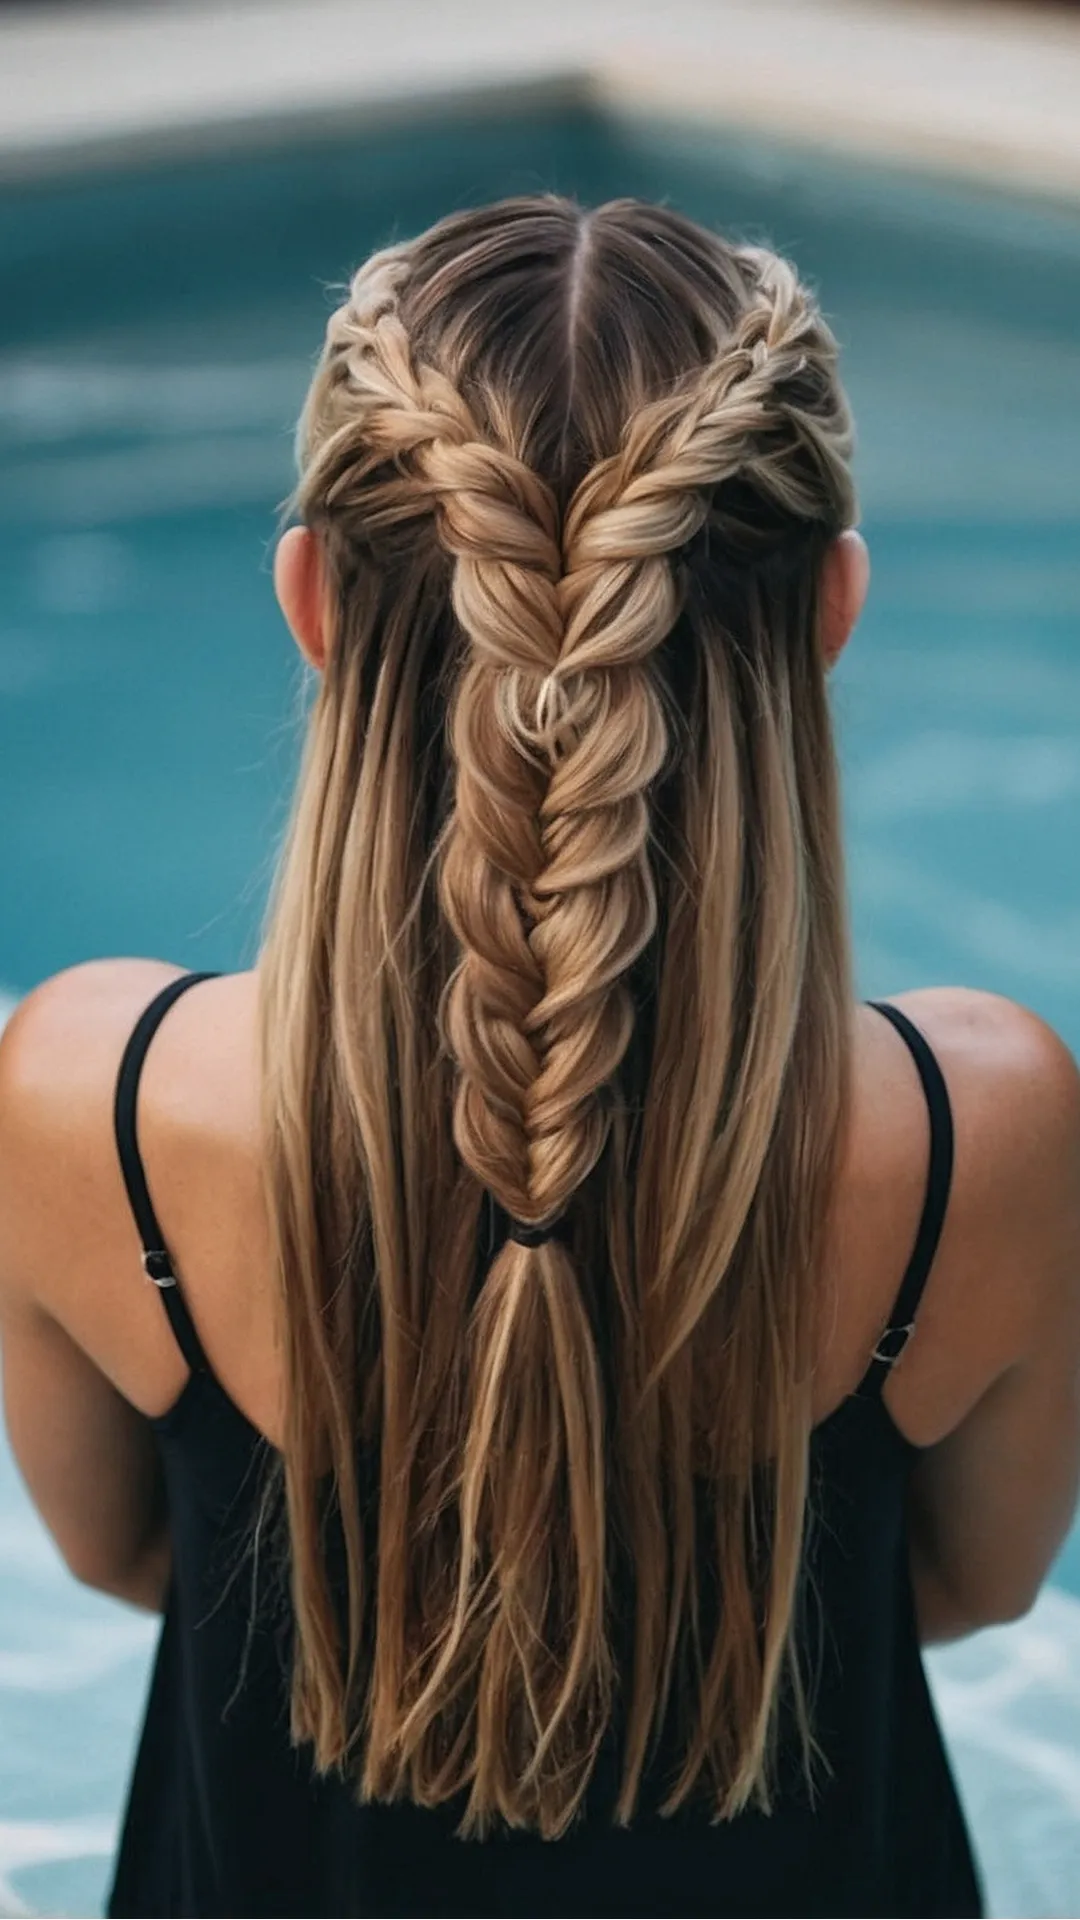 Dive Into Style: Poolside Hair Inspirations